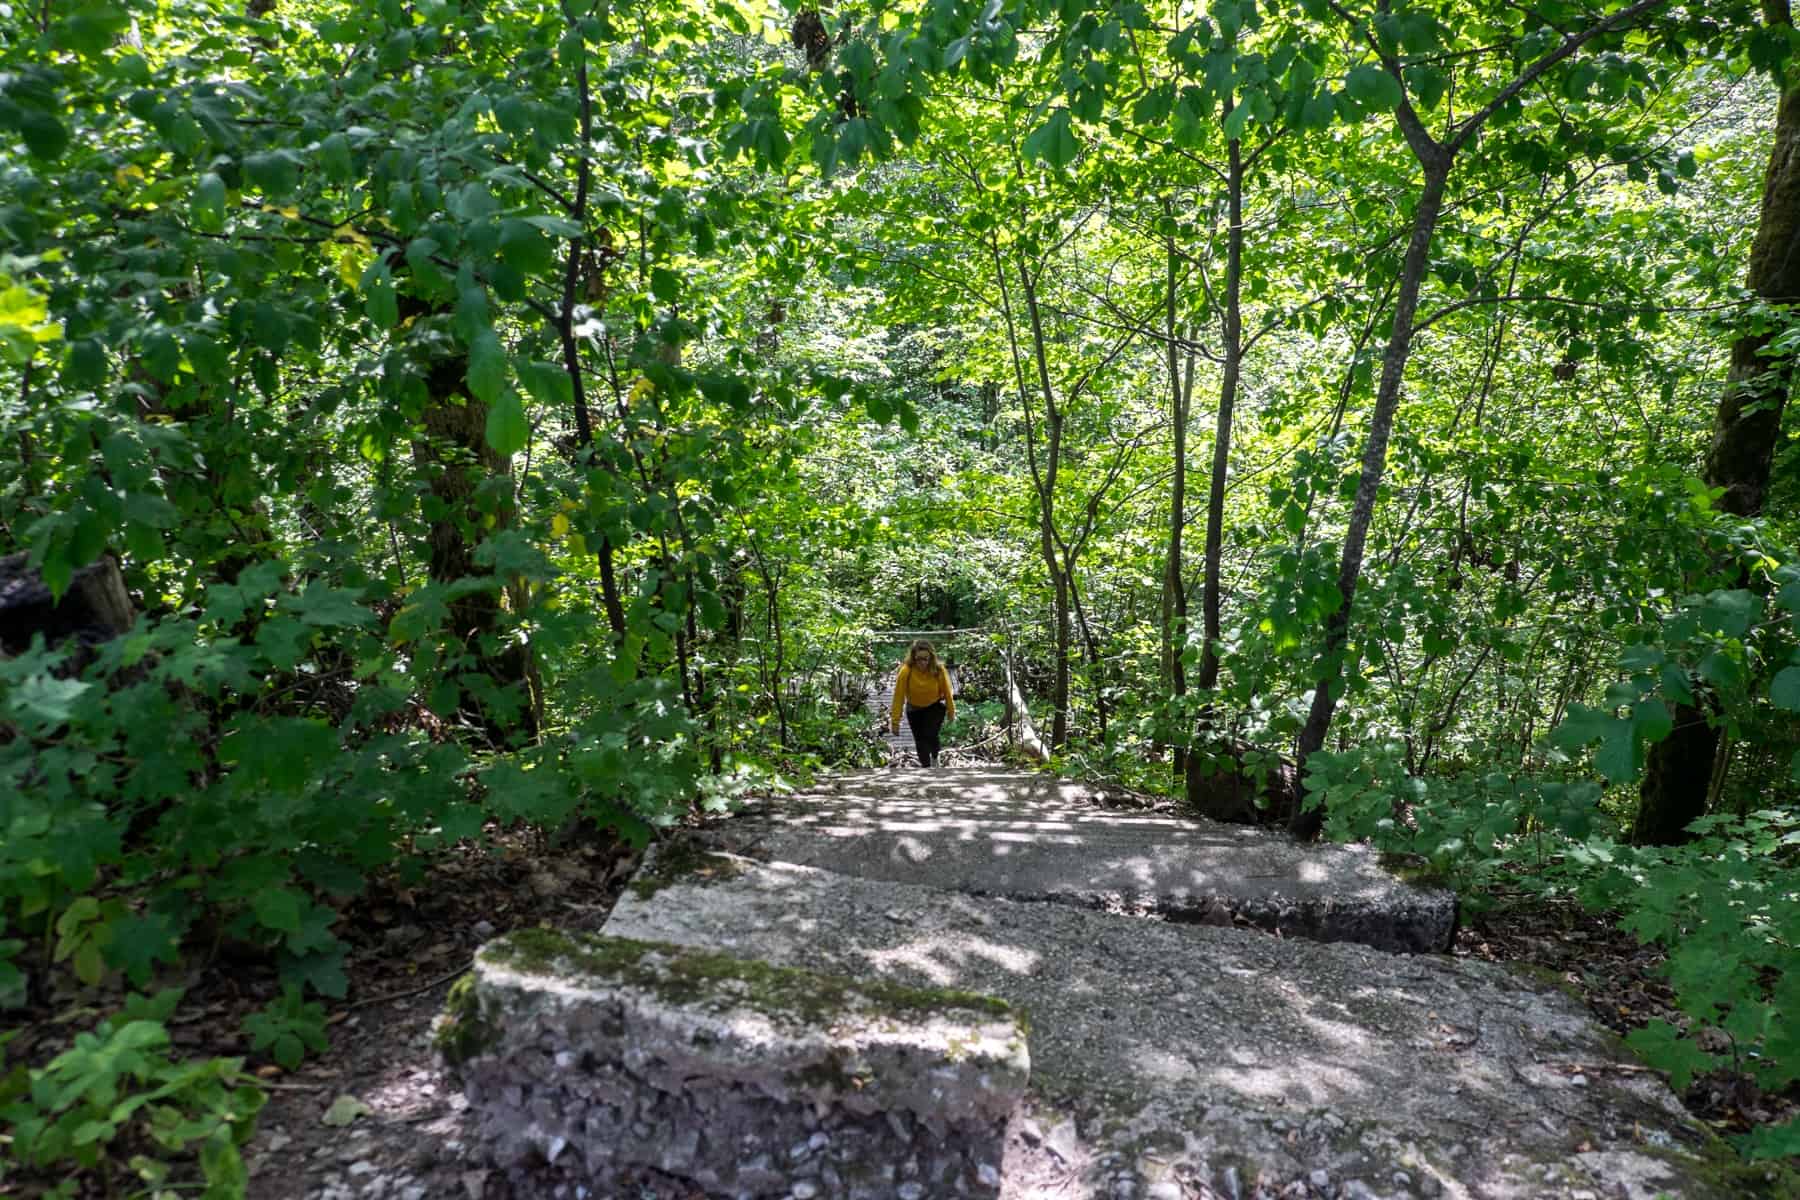 A woman in a yellow jumper walks up stone steps in a green forest in Sigulda, Latvia.